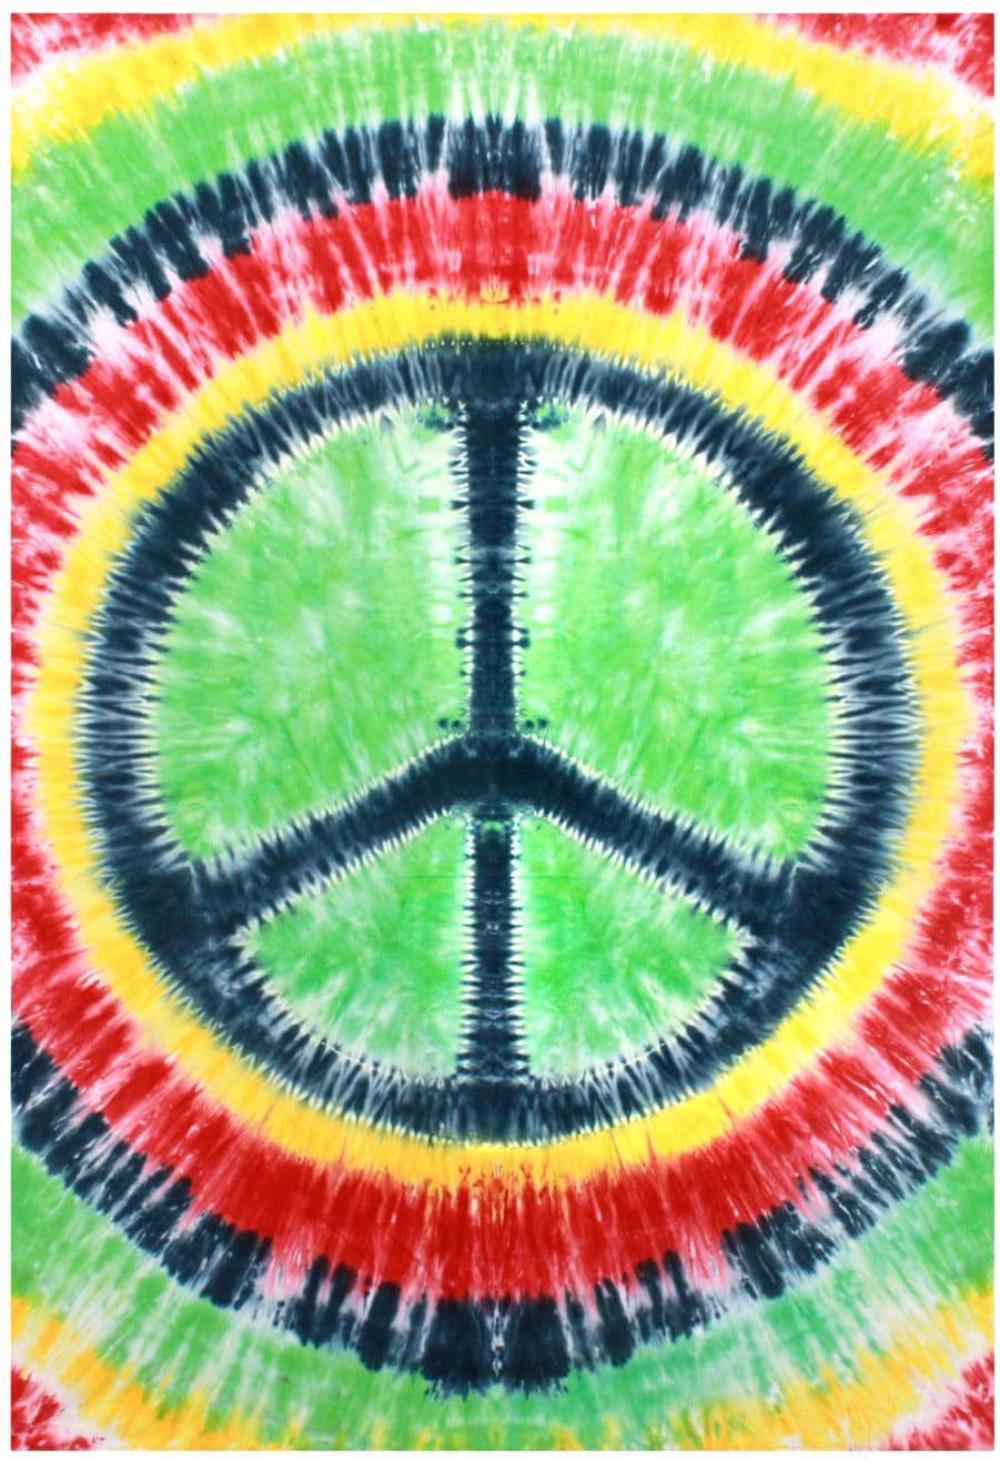 Teen Hippie Bedroom Decor GIFT Personalized Peace Sign Tie Dye WALL CLOCK 